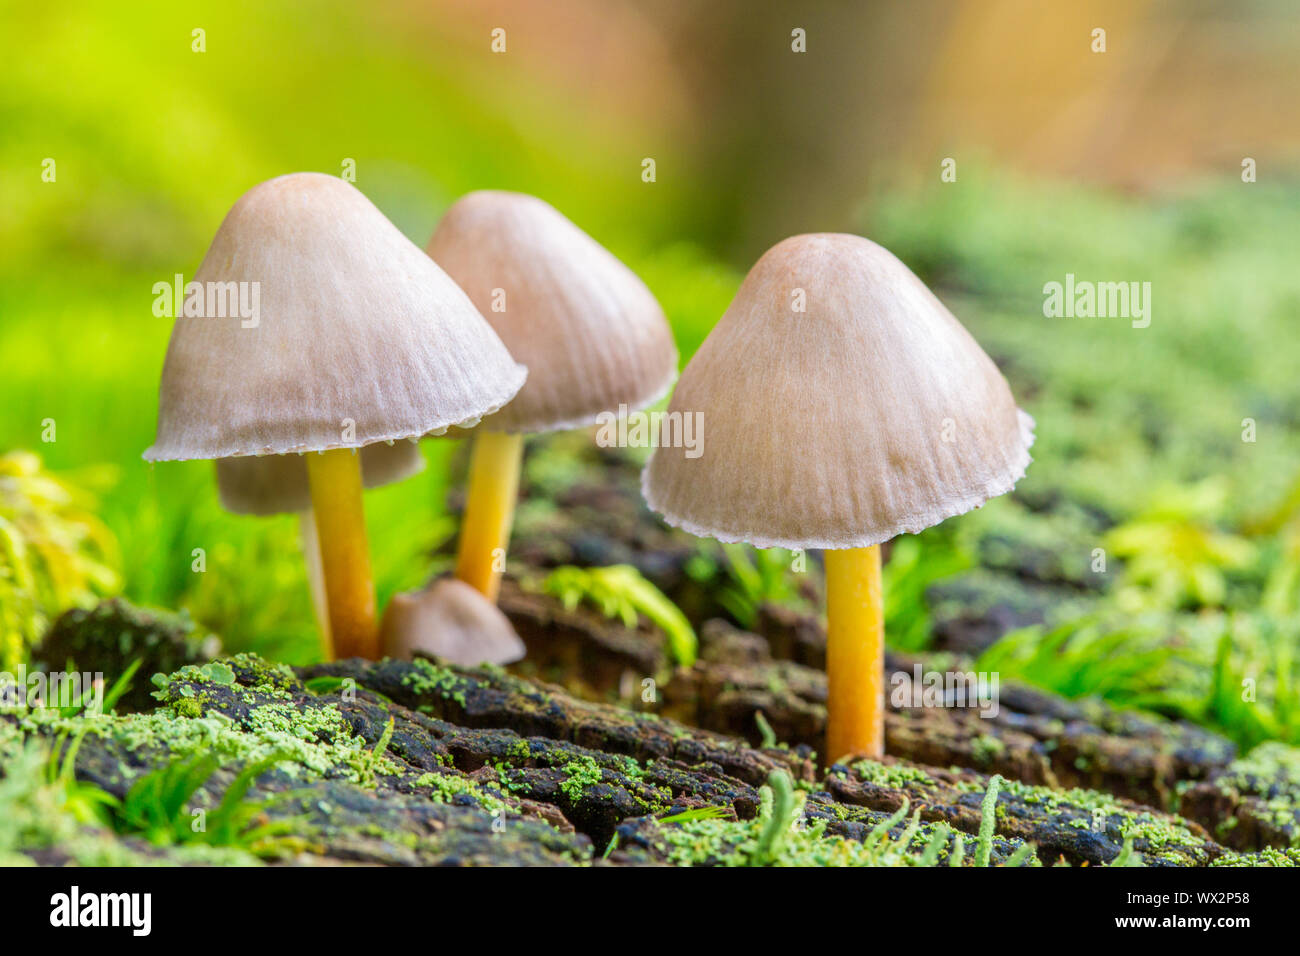 Group of small mushrooms with yellow stalks Stock Photo